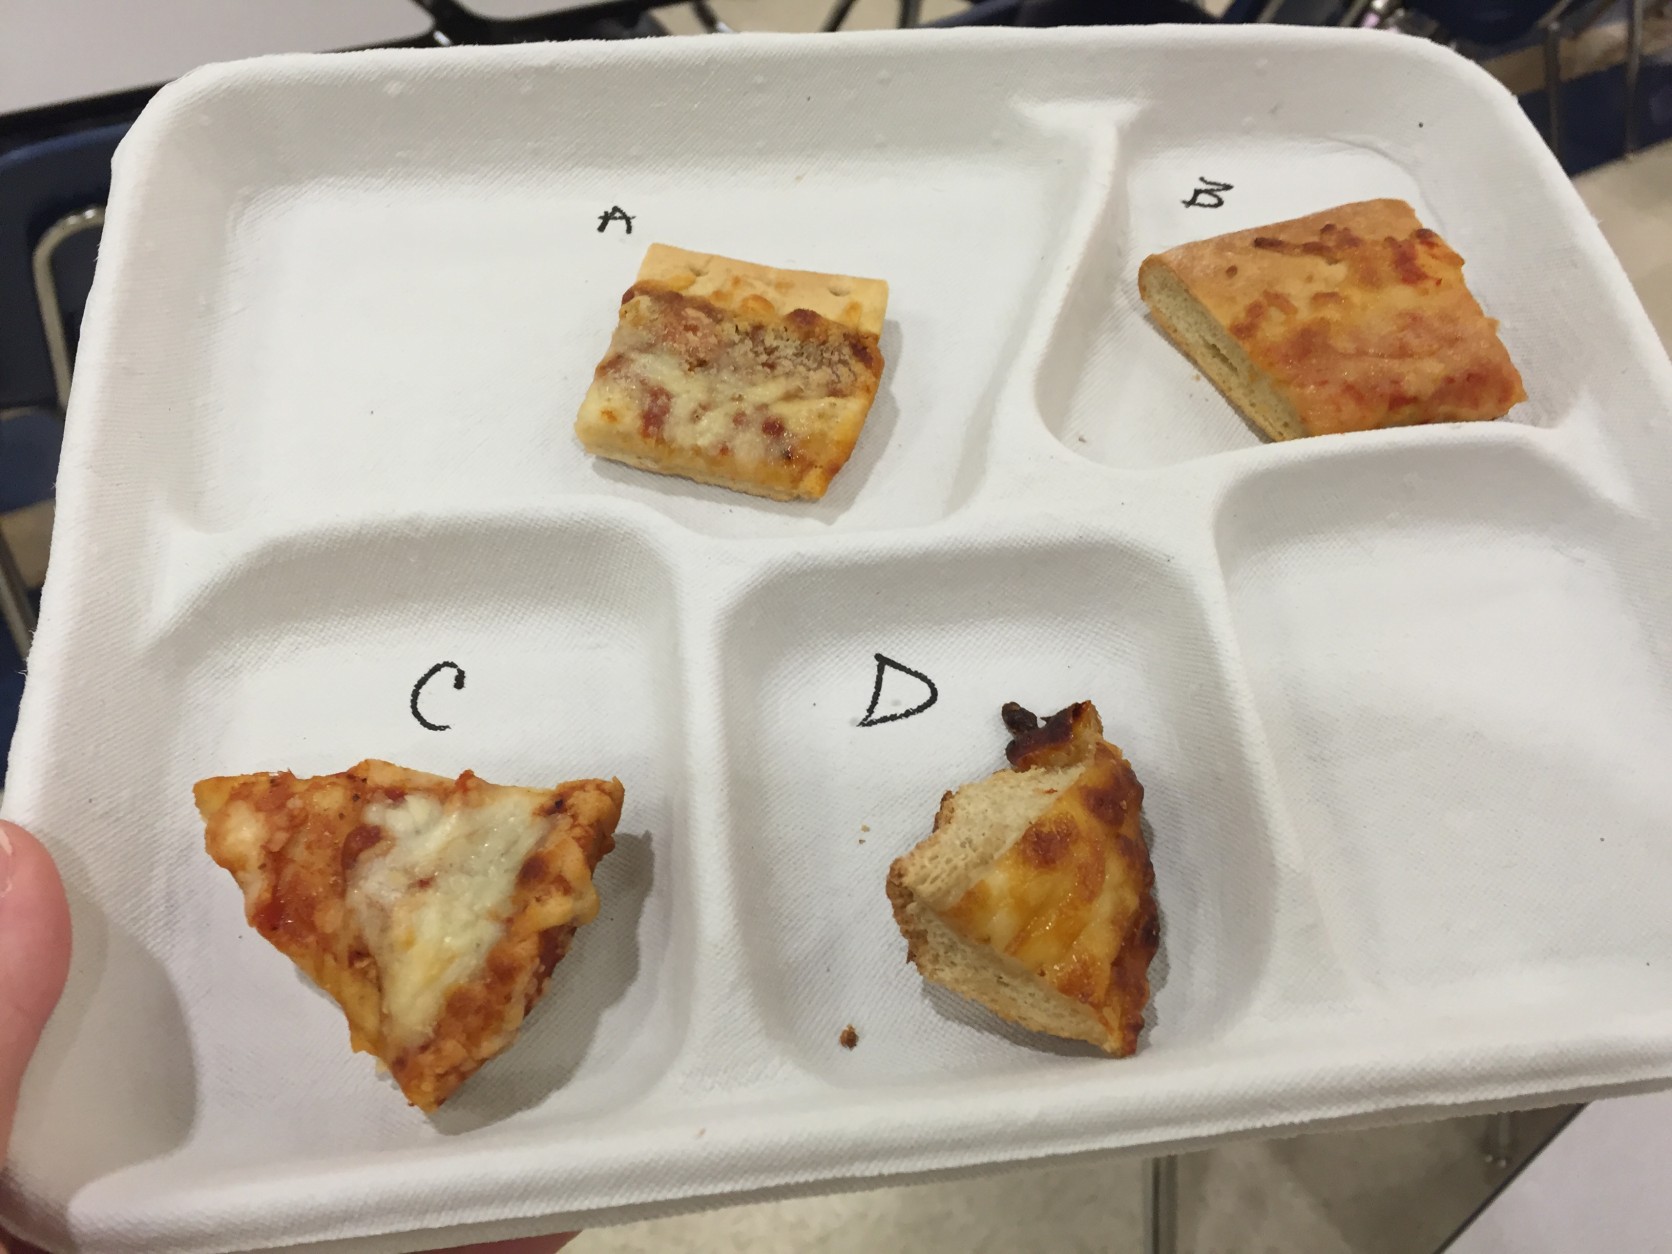 Here's what the different pizza samples looked like. Sample B was popular with taste-testers we talked to. Sample D was like garlic bread. (WTOP/Michelle Basch)